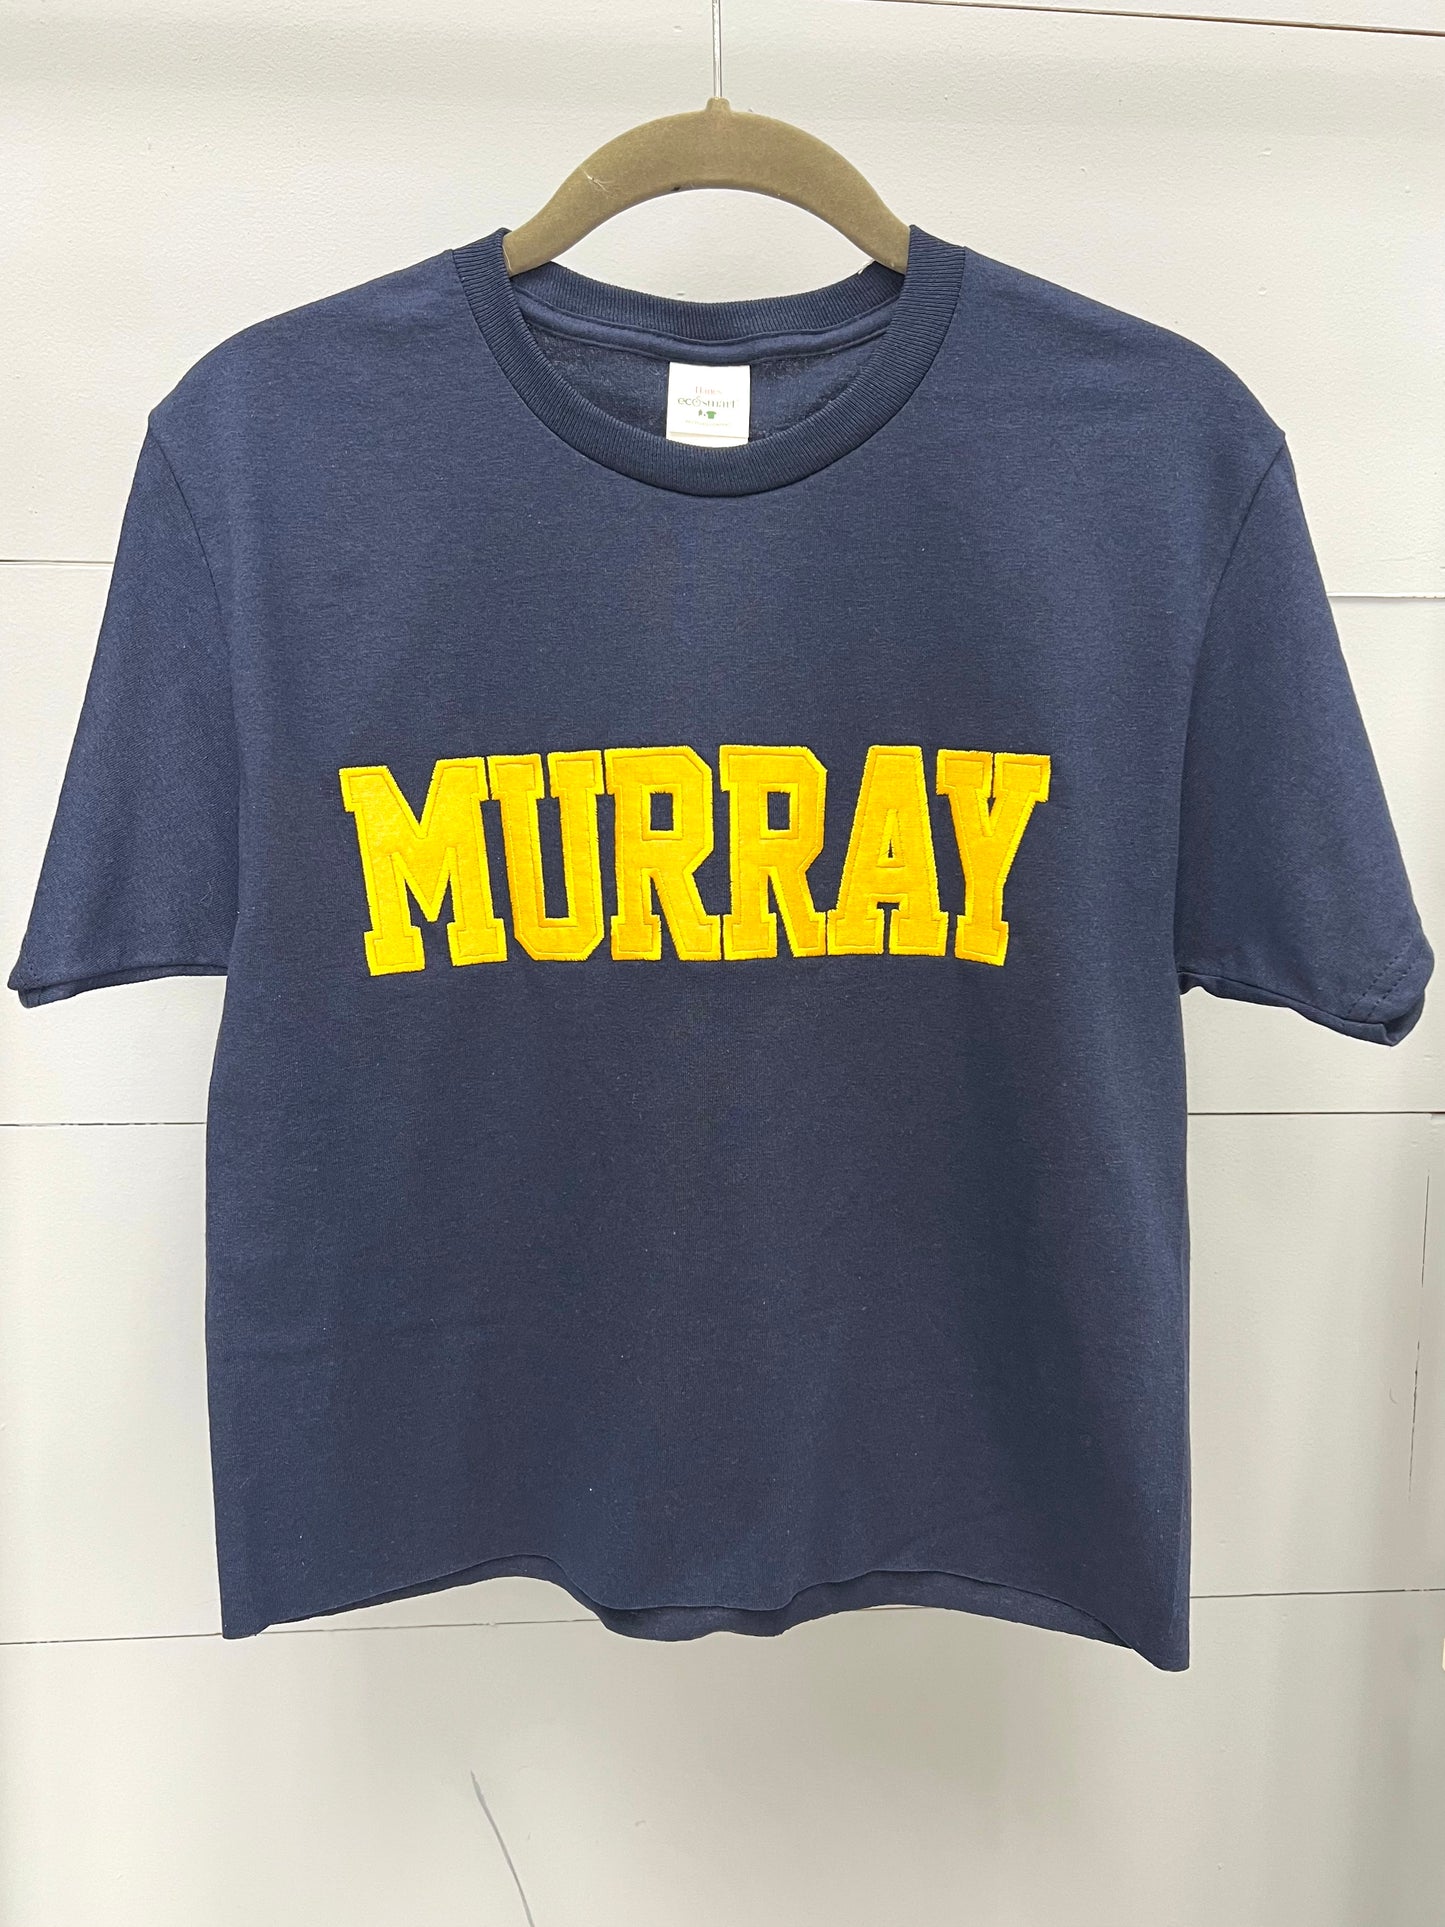 Murray Cropped Navy Tee